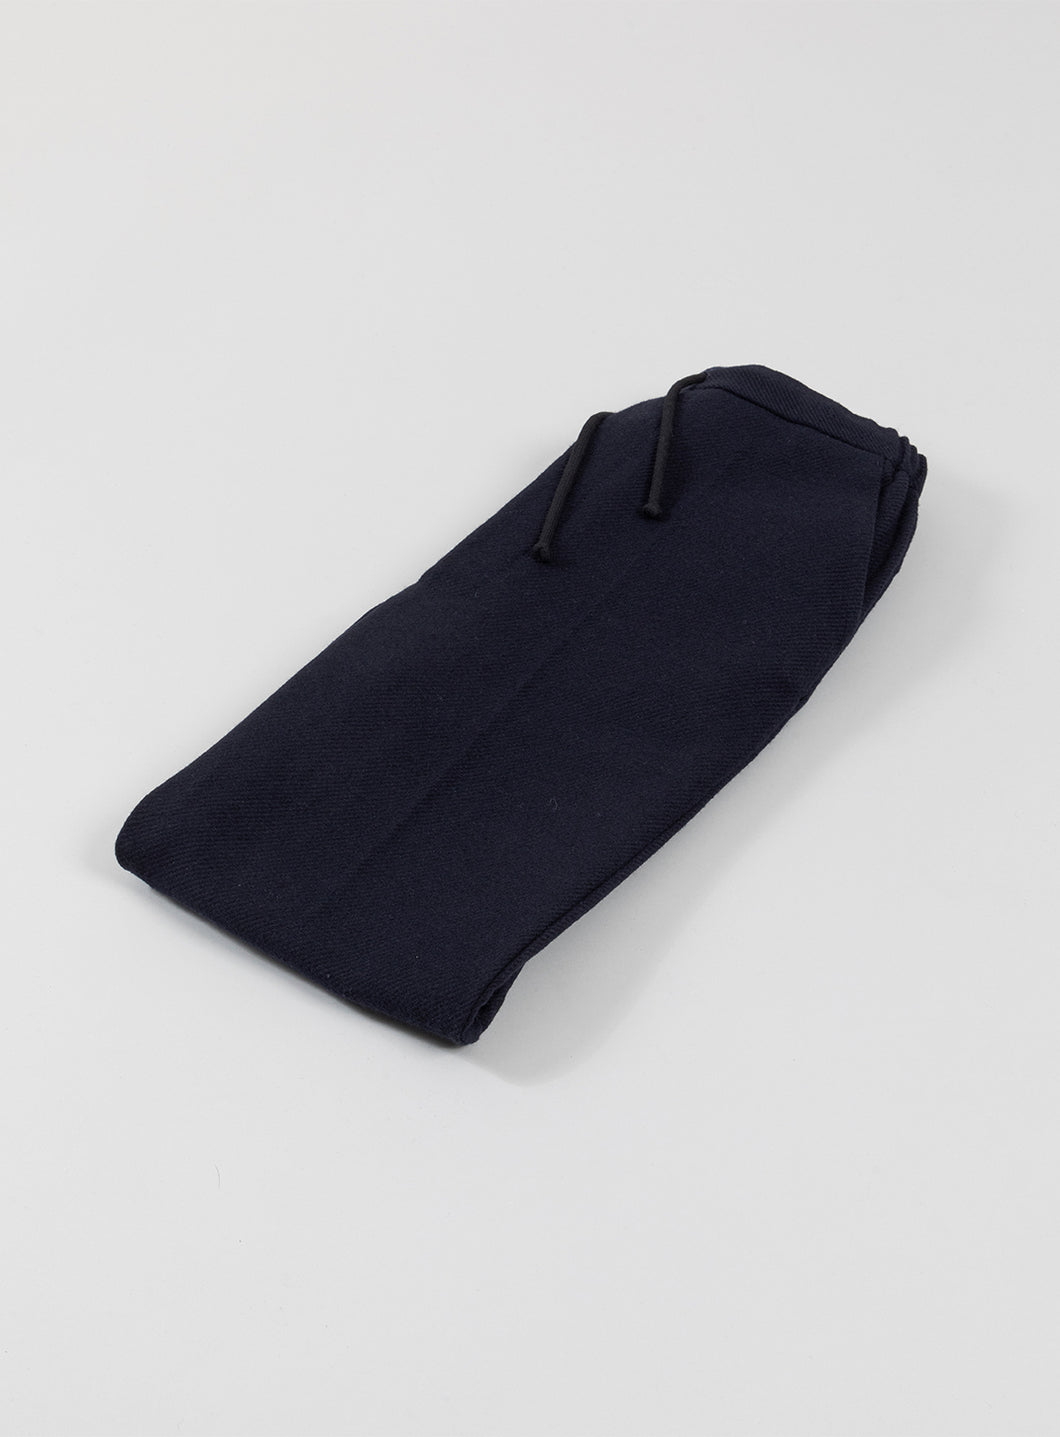 Pleated Pants with Tightening Link in Navy Blue Wool